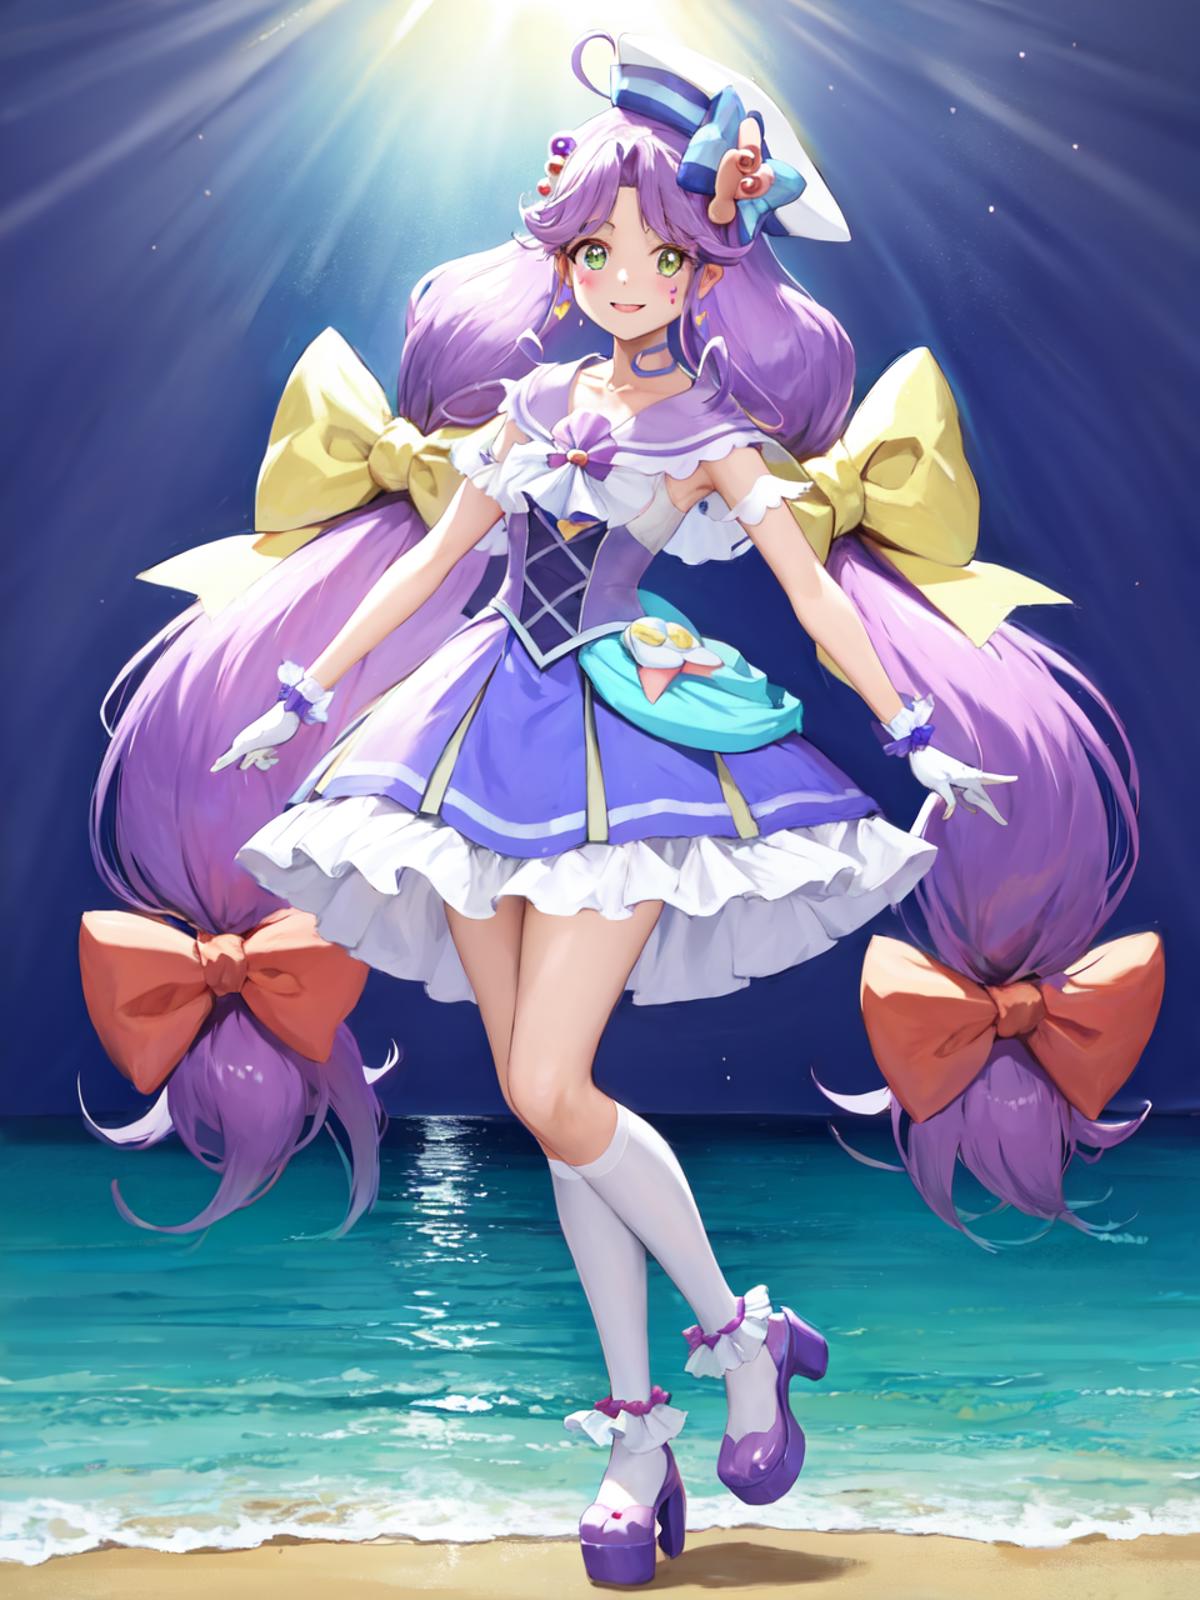 Cure Coral (Tropical-Rouge! Pretty Cure) トロピカル～ジュ！プリキュア キュアコーラル image by secretmoon